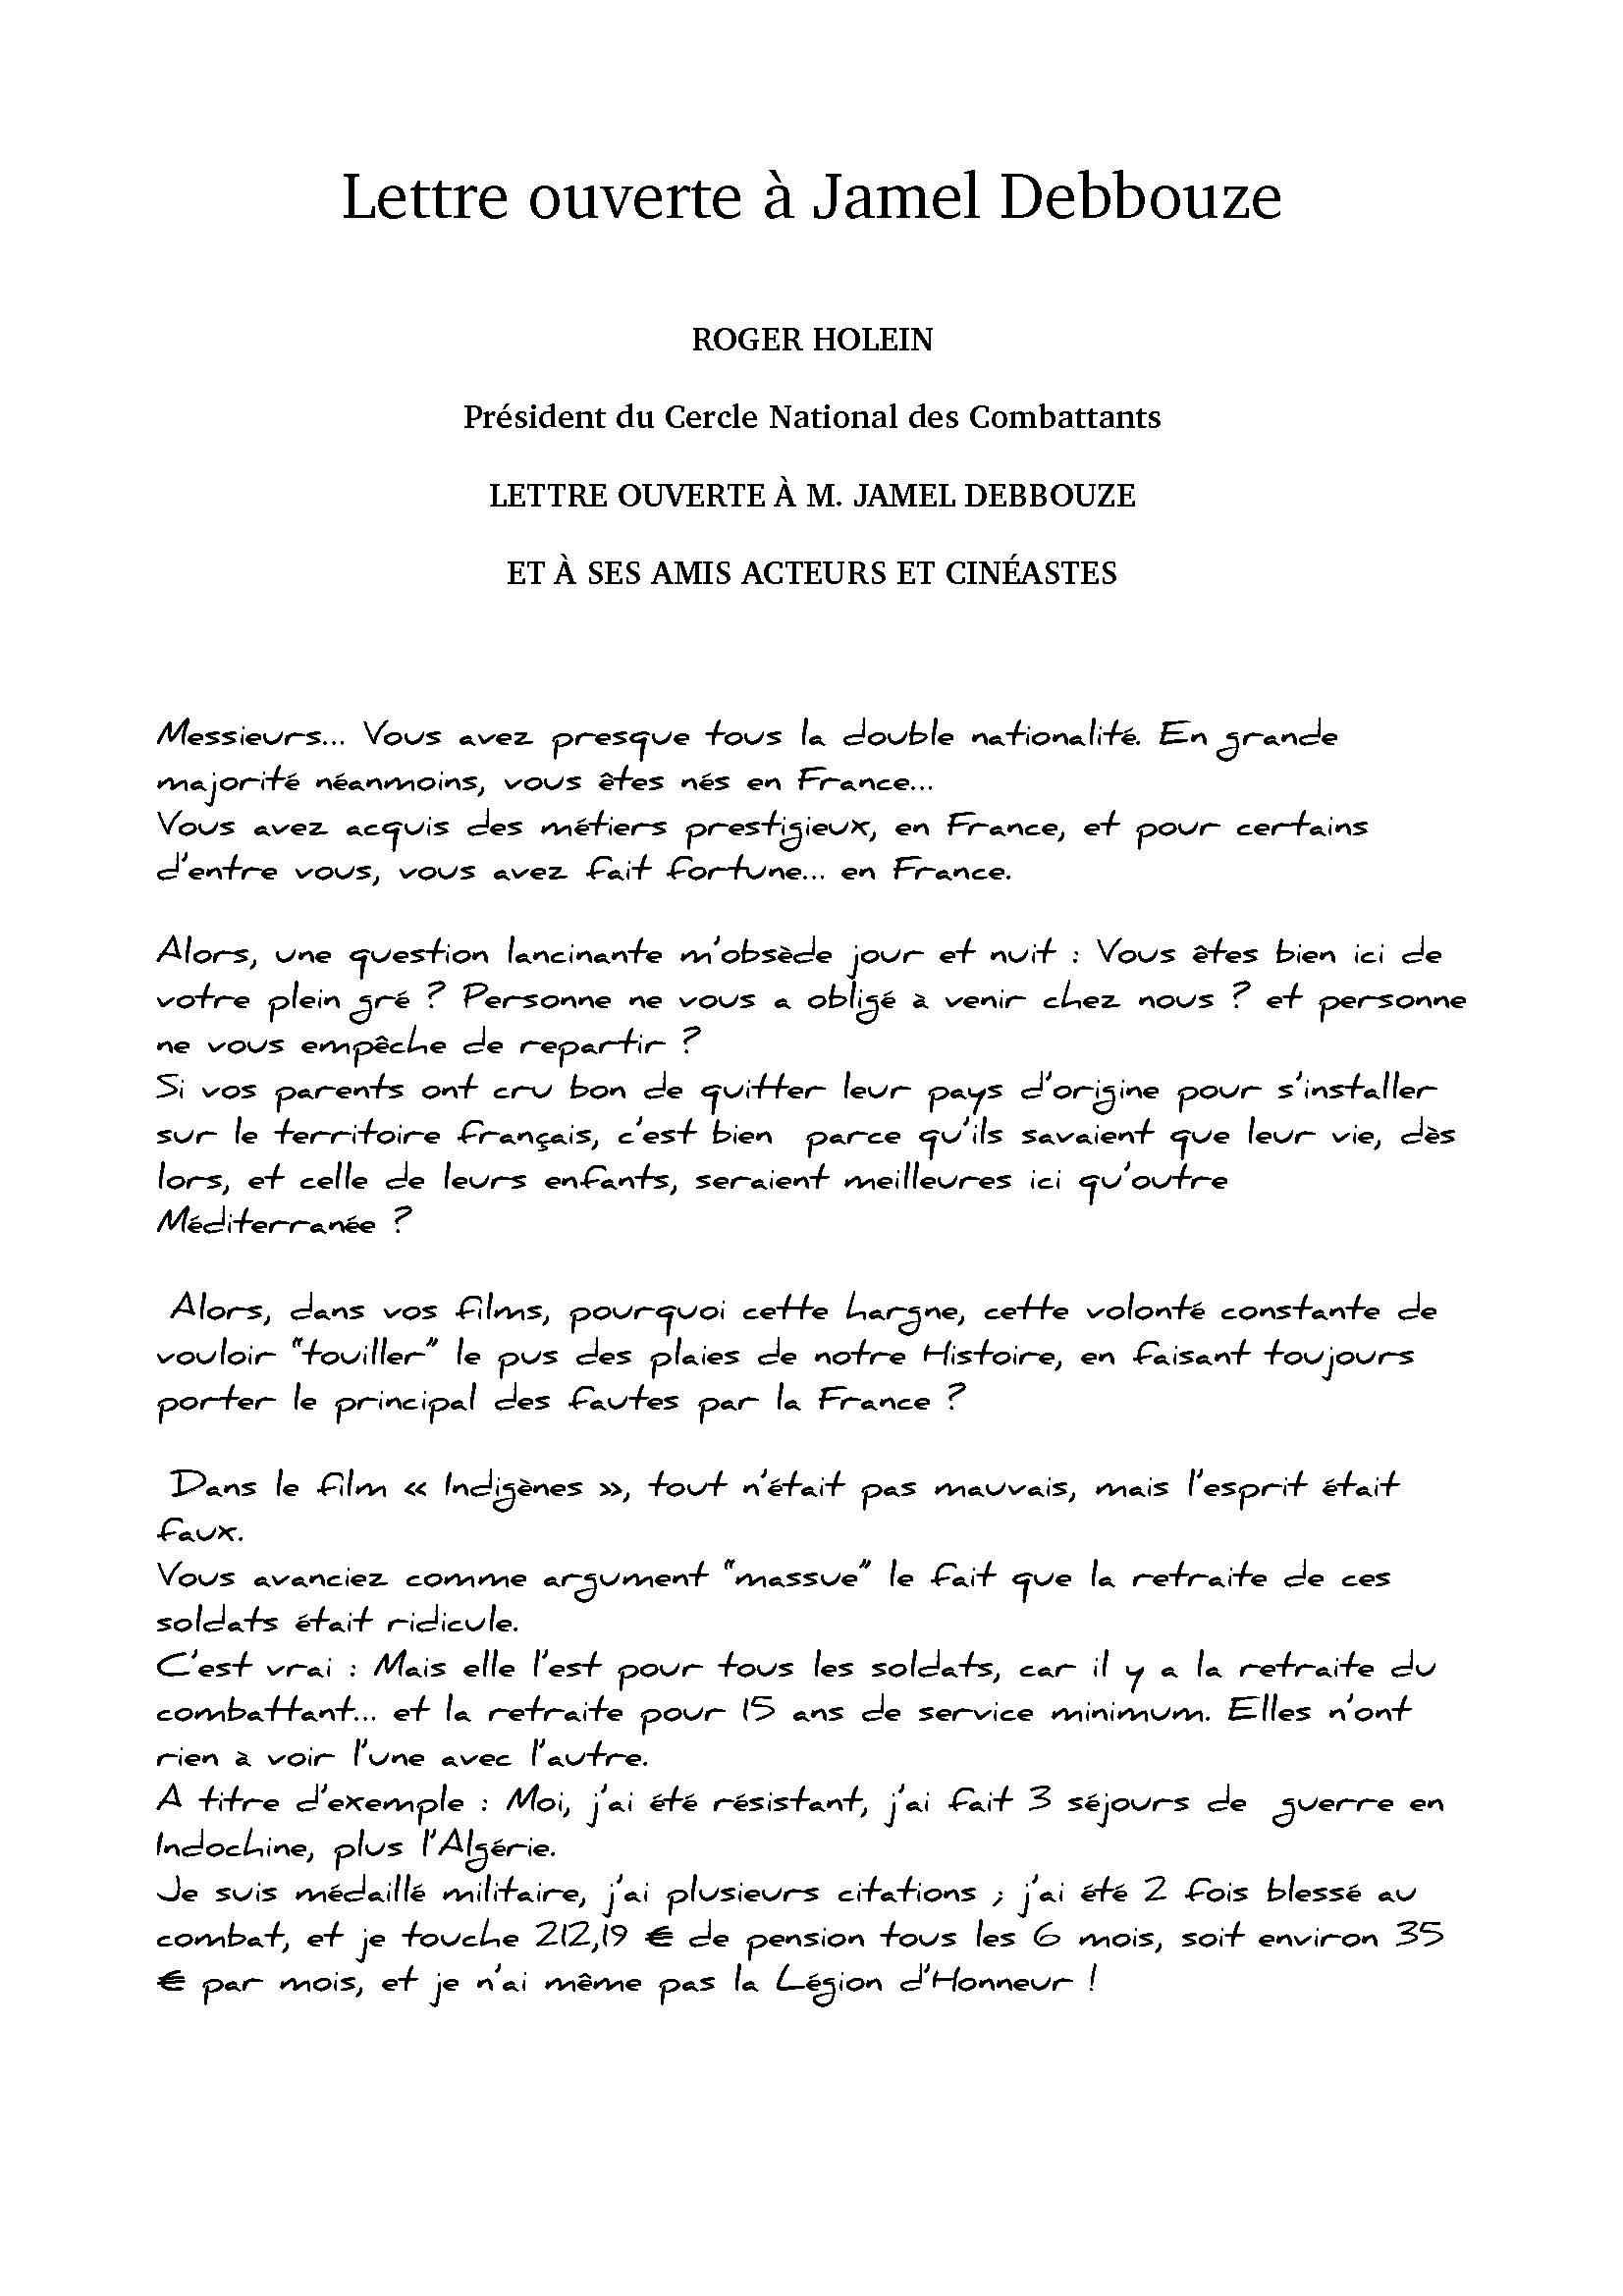 LettreOuverteDebbouze_Page_1